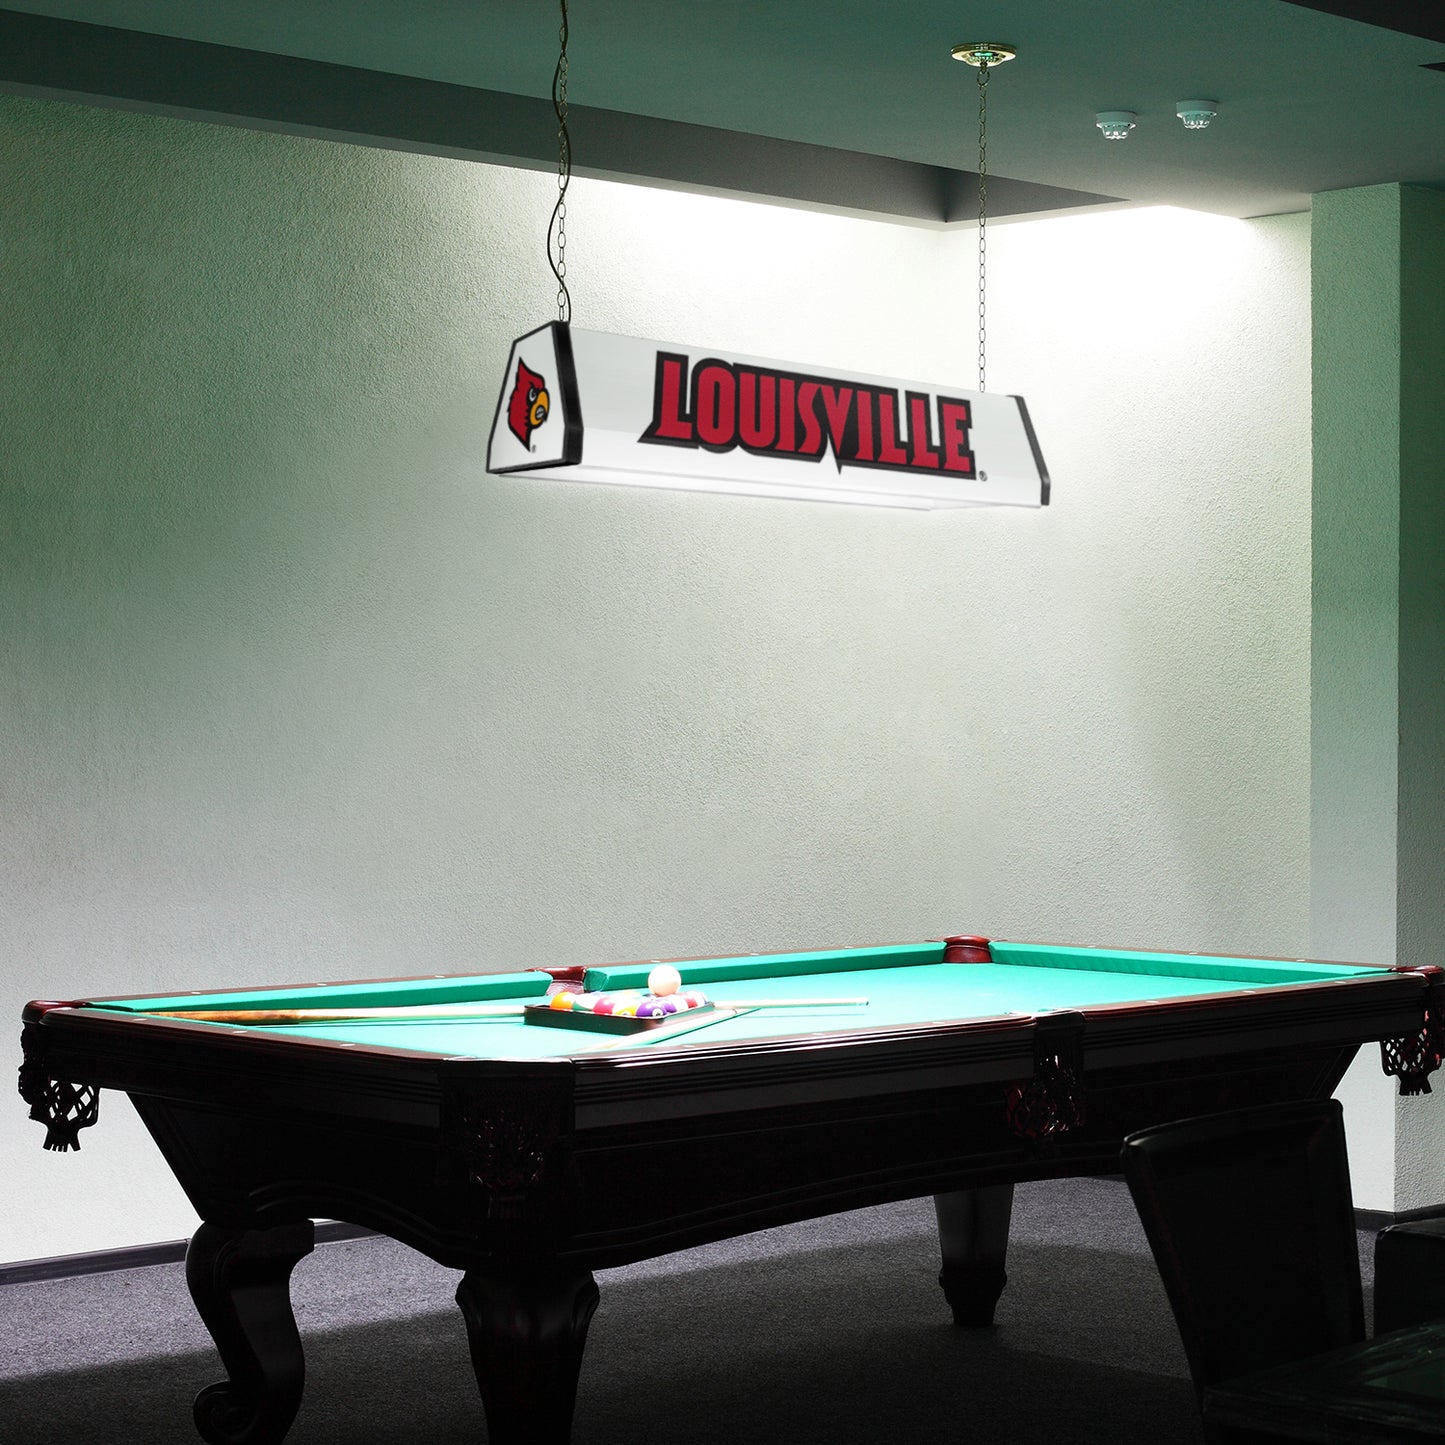 Louisville Cardinals Standard Pool Table Light Room View